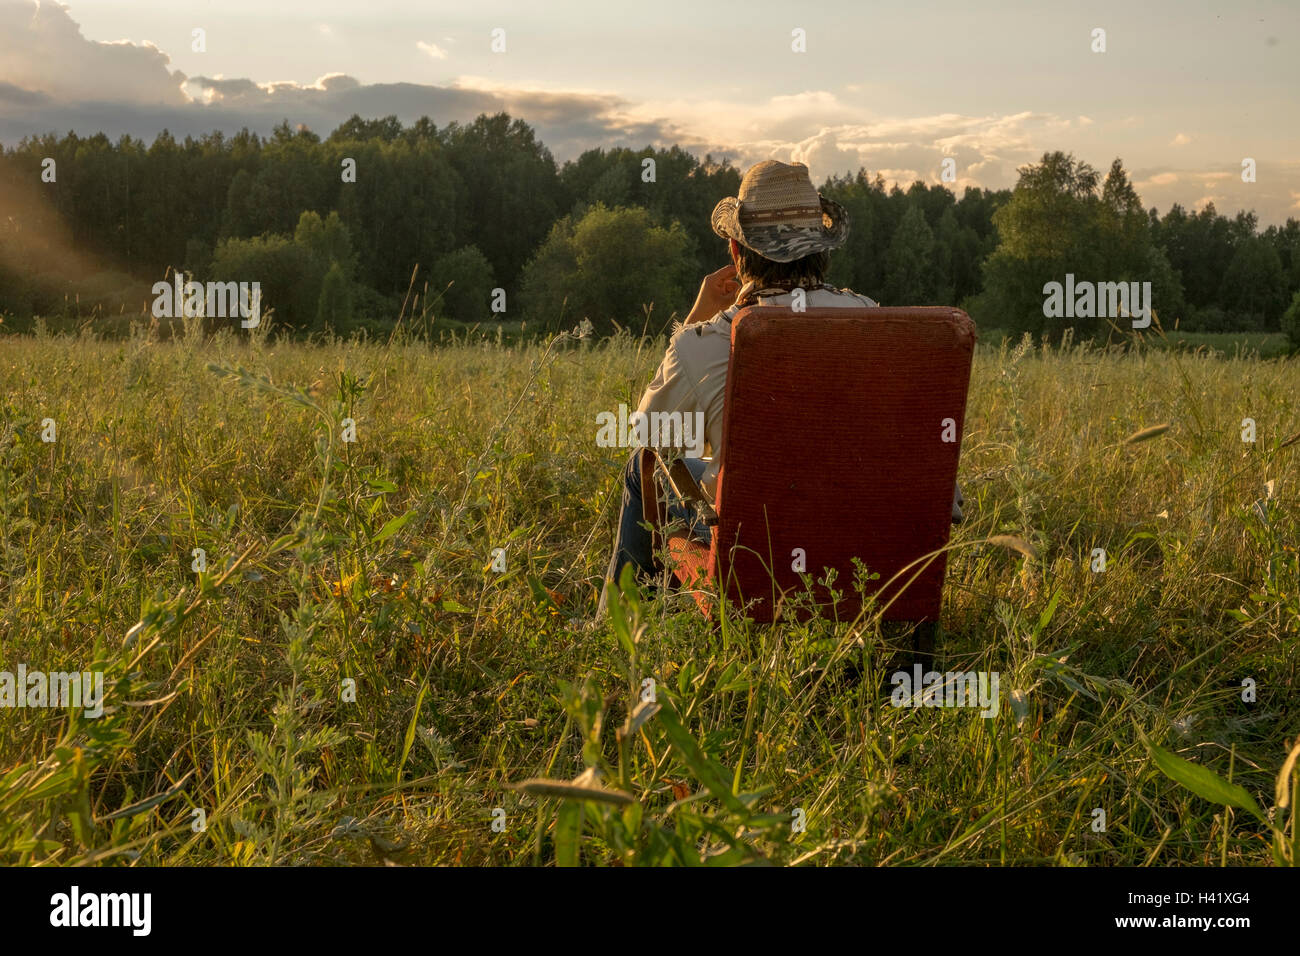 Mari man sitting on chair in field Banque D'Images